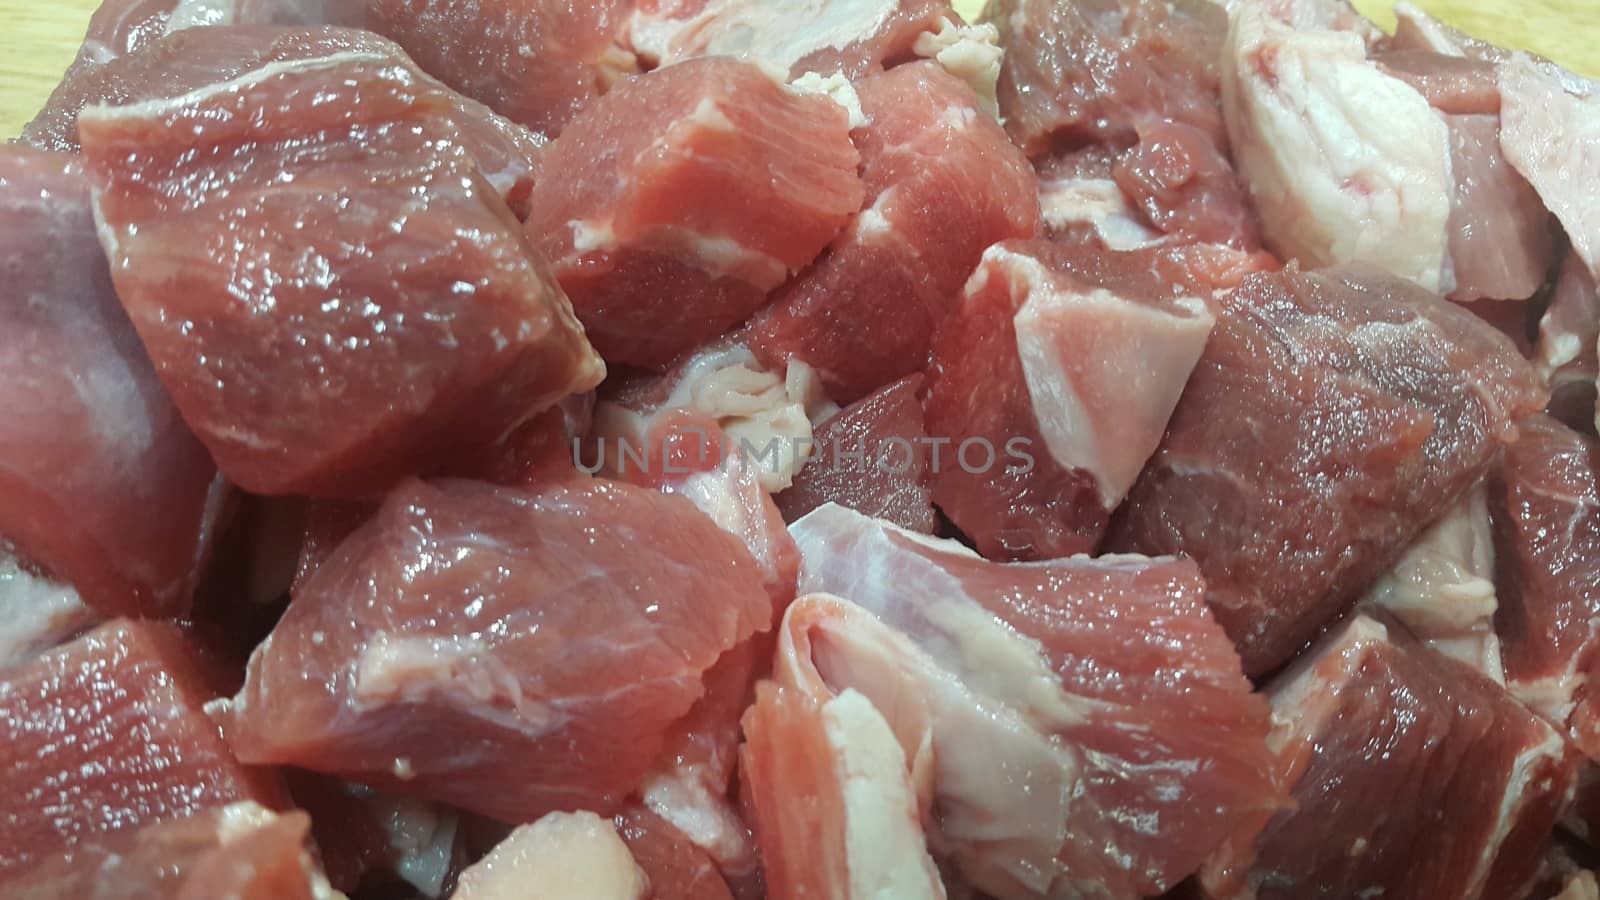 Close up view of fresh finely chopped meat cubes. Red meat small steaks with whitish meat fat.